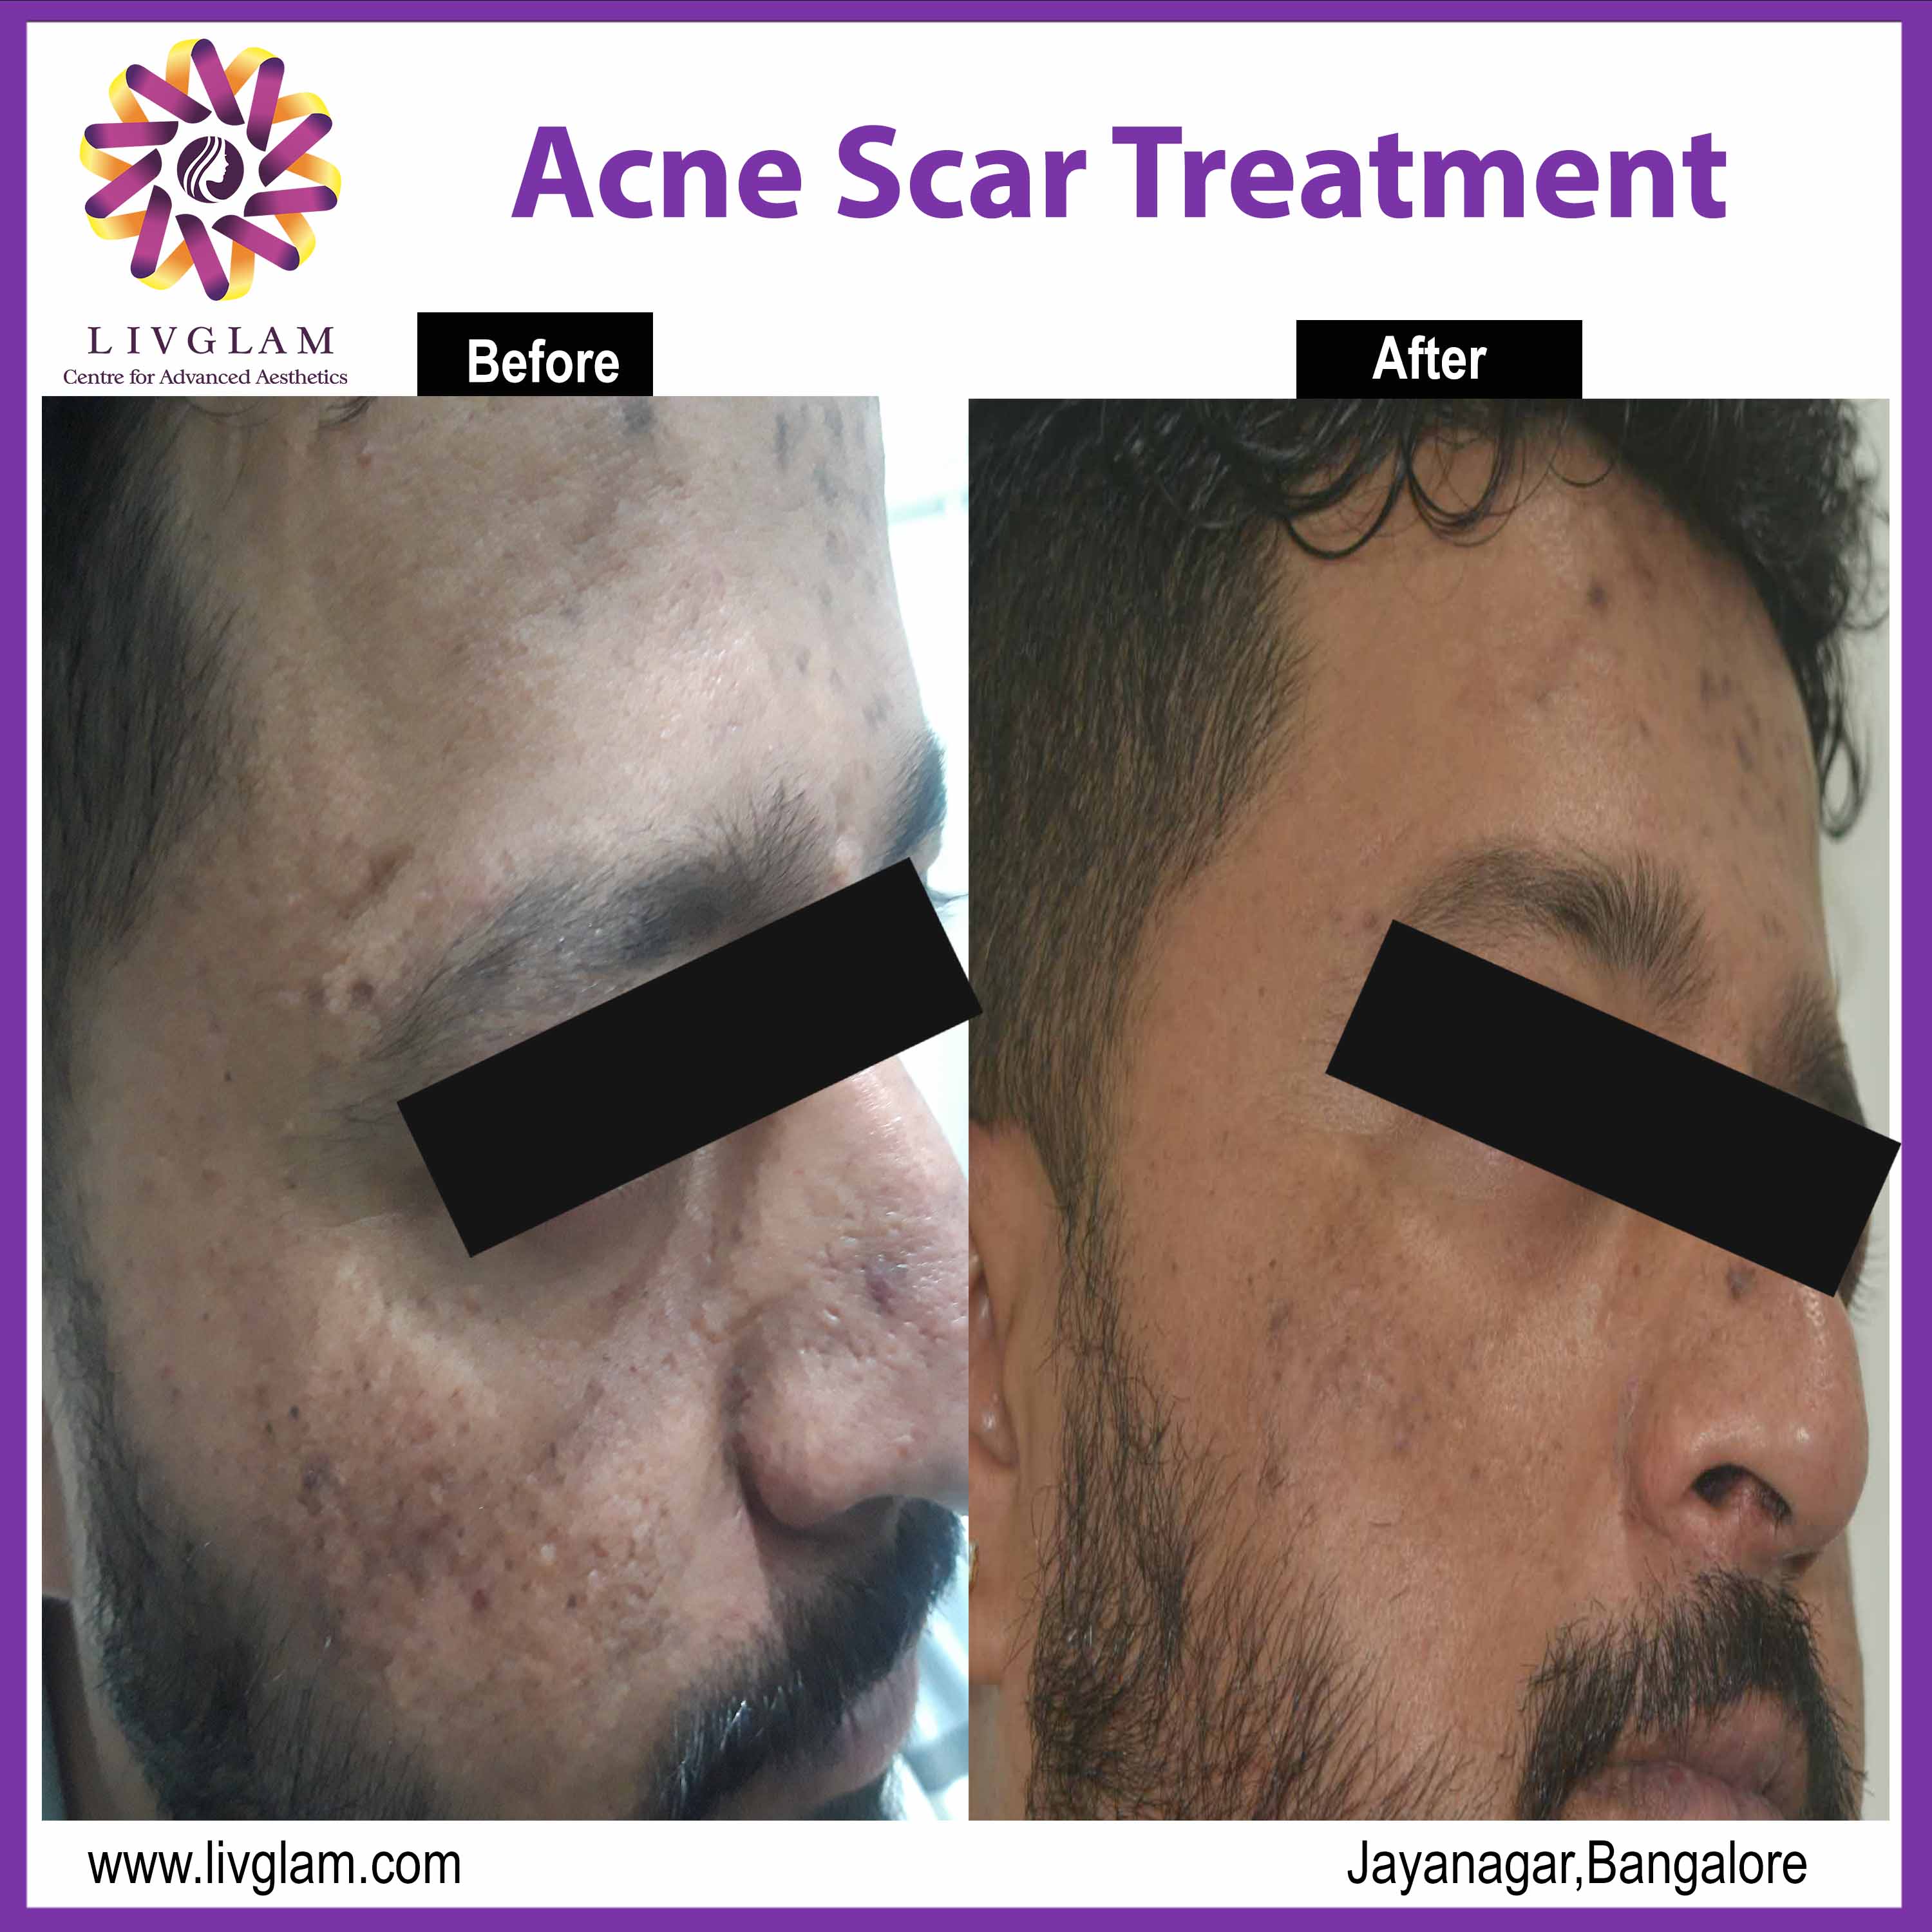 laser treatment for acne scars cost in bangalore